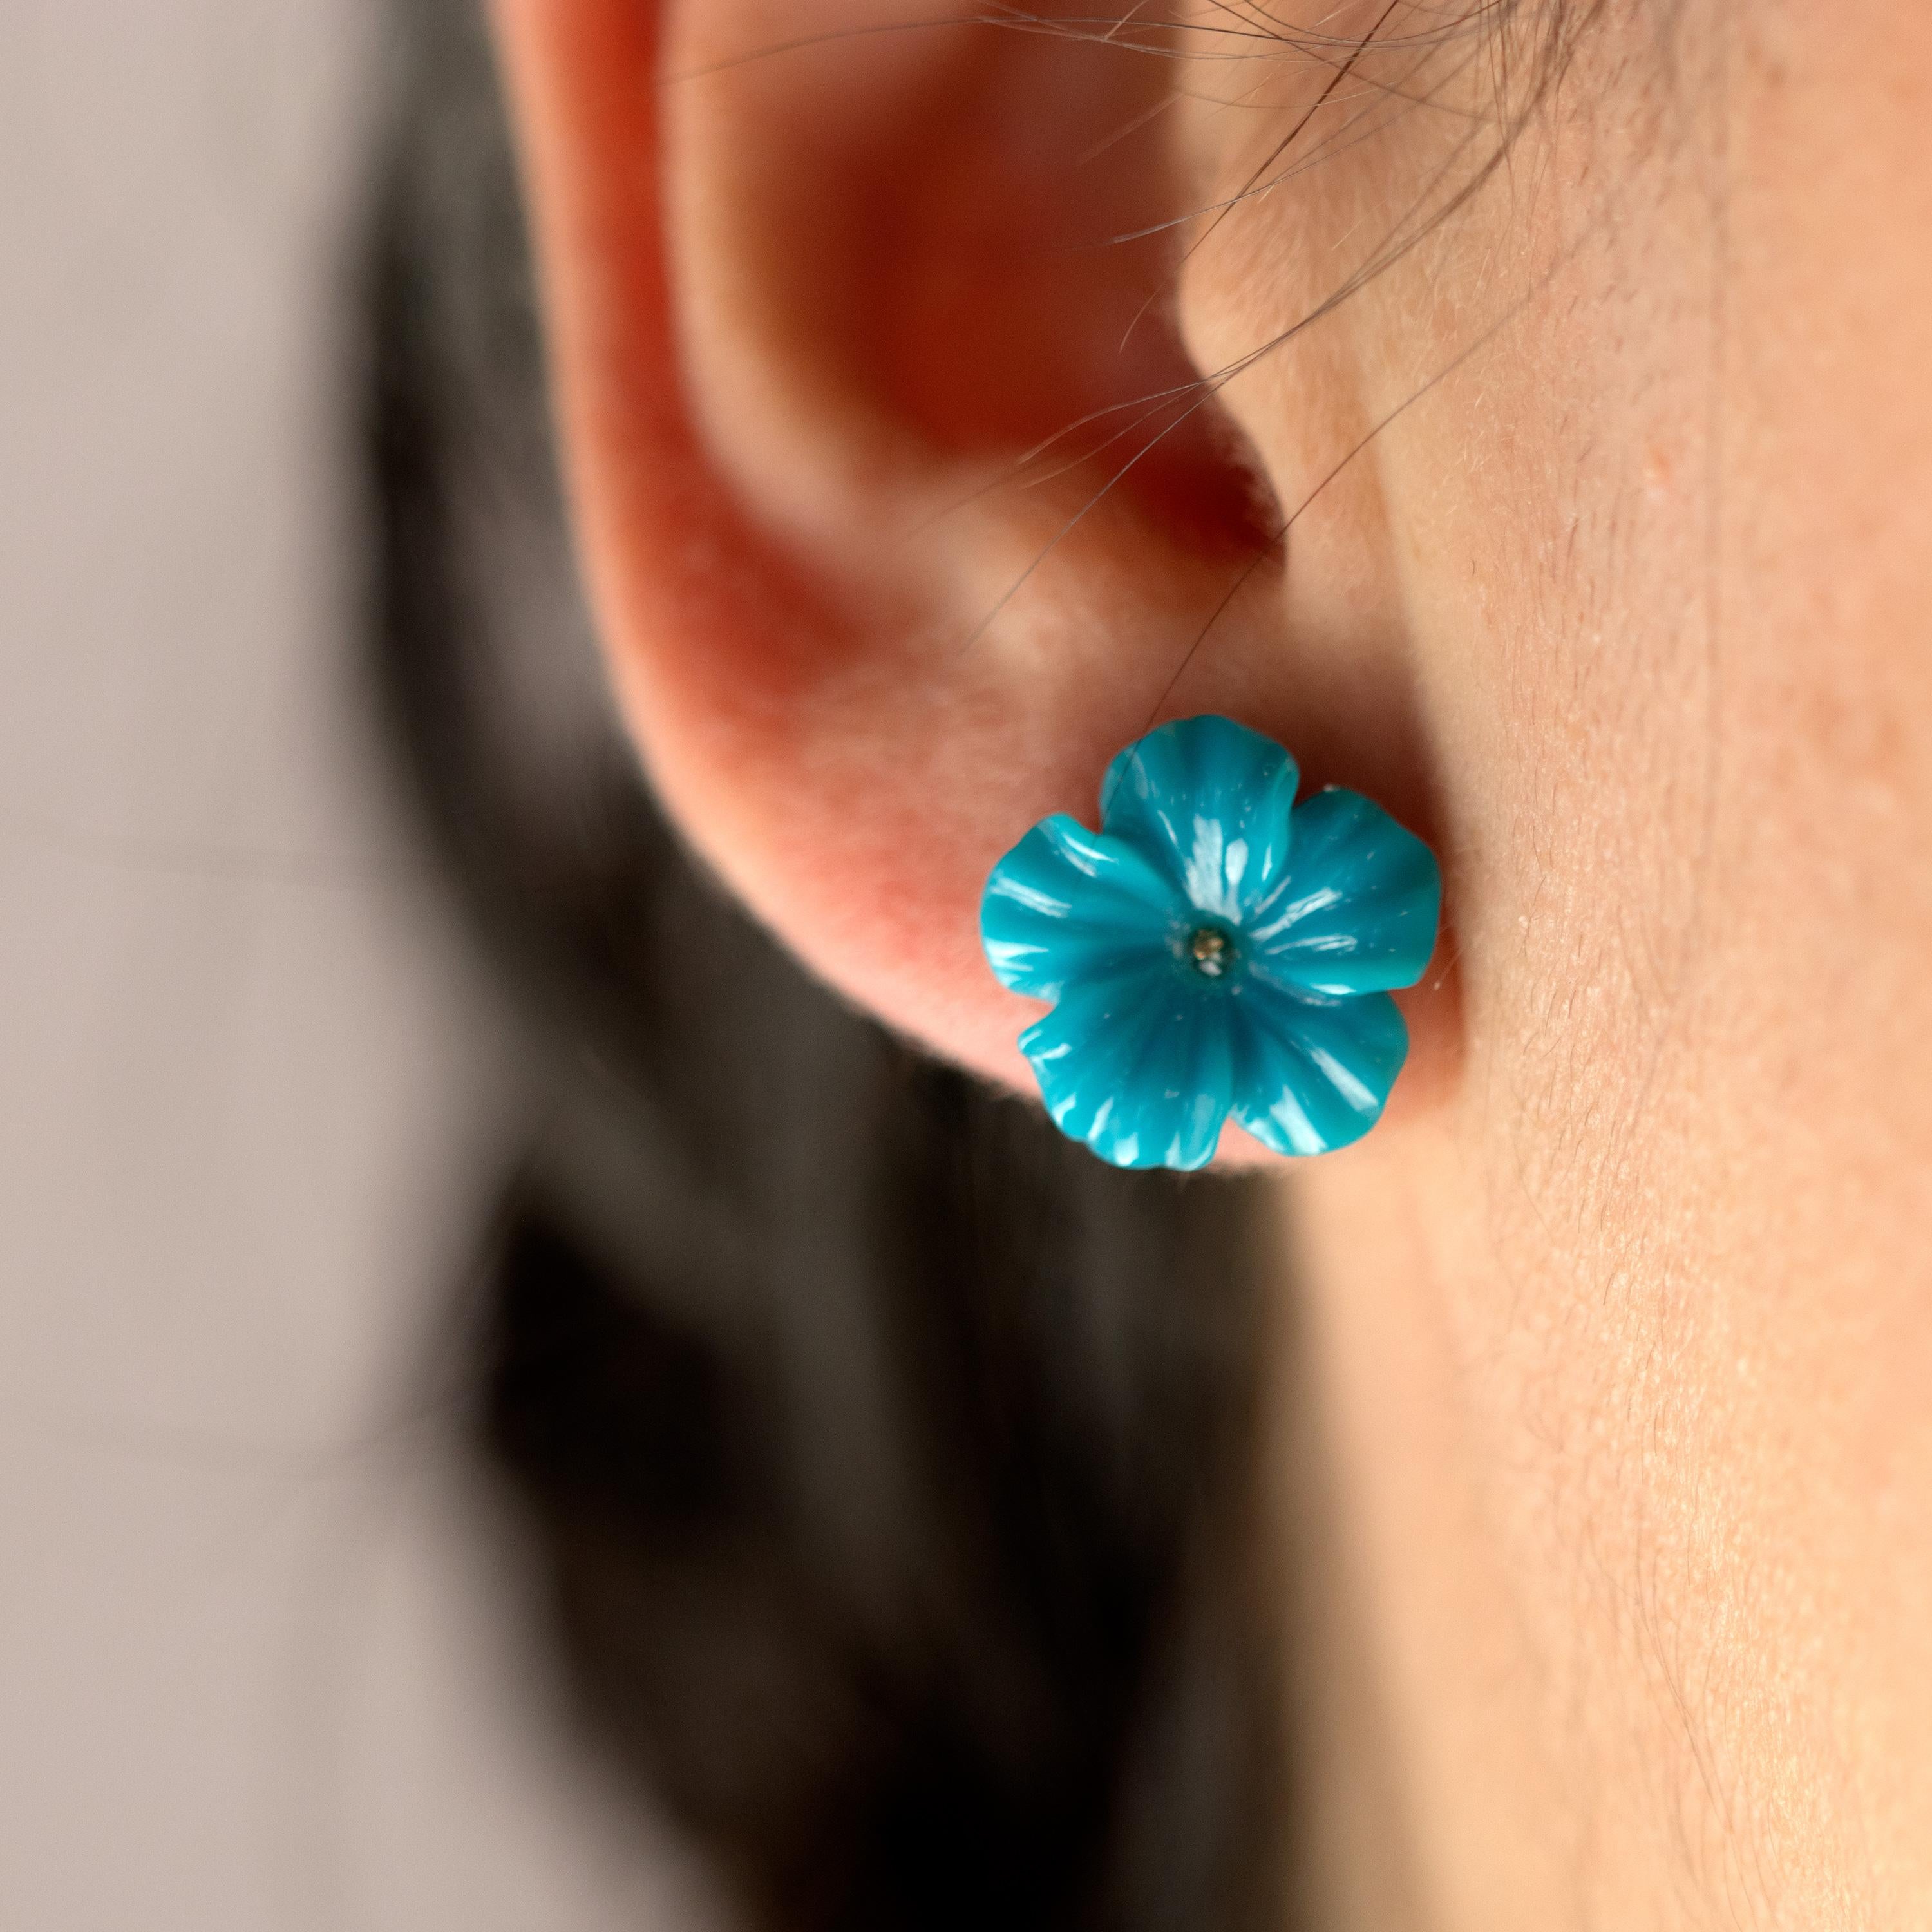 Astonishing natural turquoise flowers stud earrings, Carved petals that evoke the italian handmade traditional jewelry work.

Beautiful and delicate design that evokes the roots of beauty that are gradually woven to achieve a harmonious and